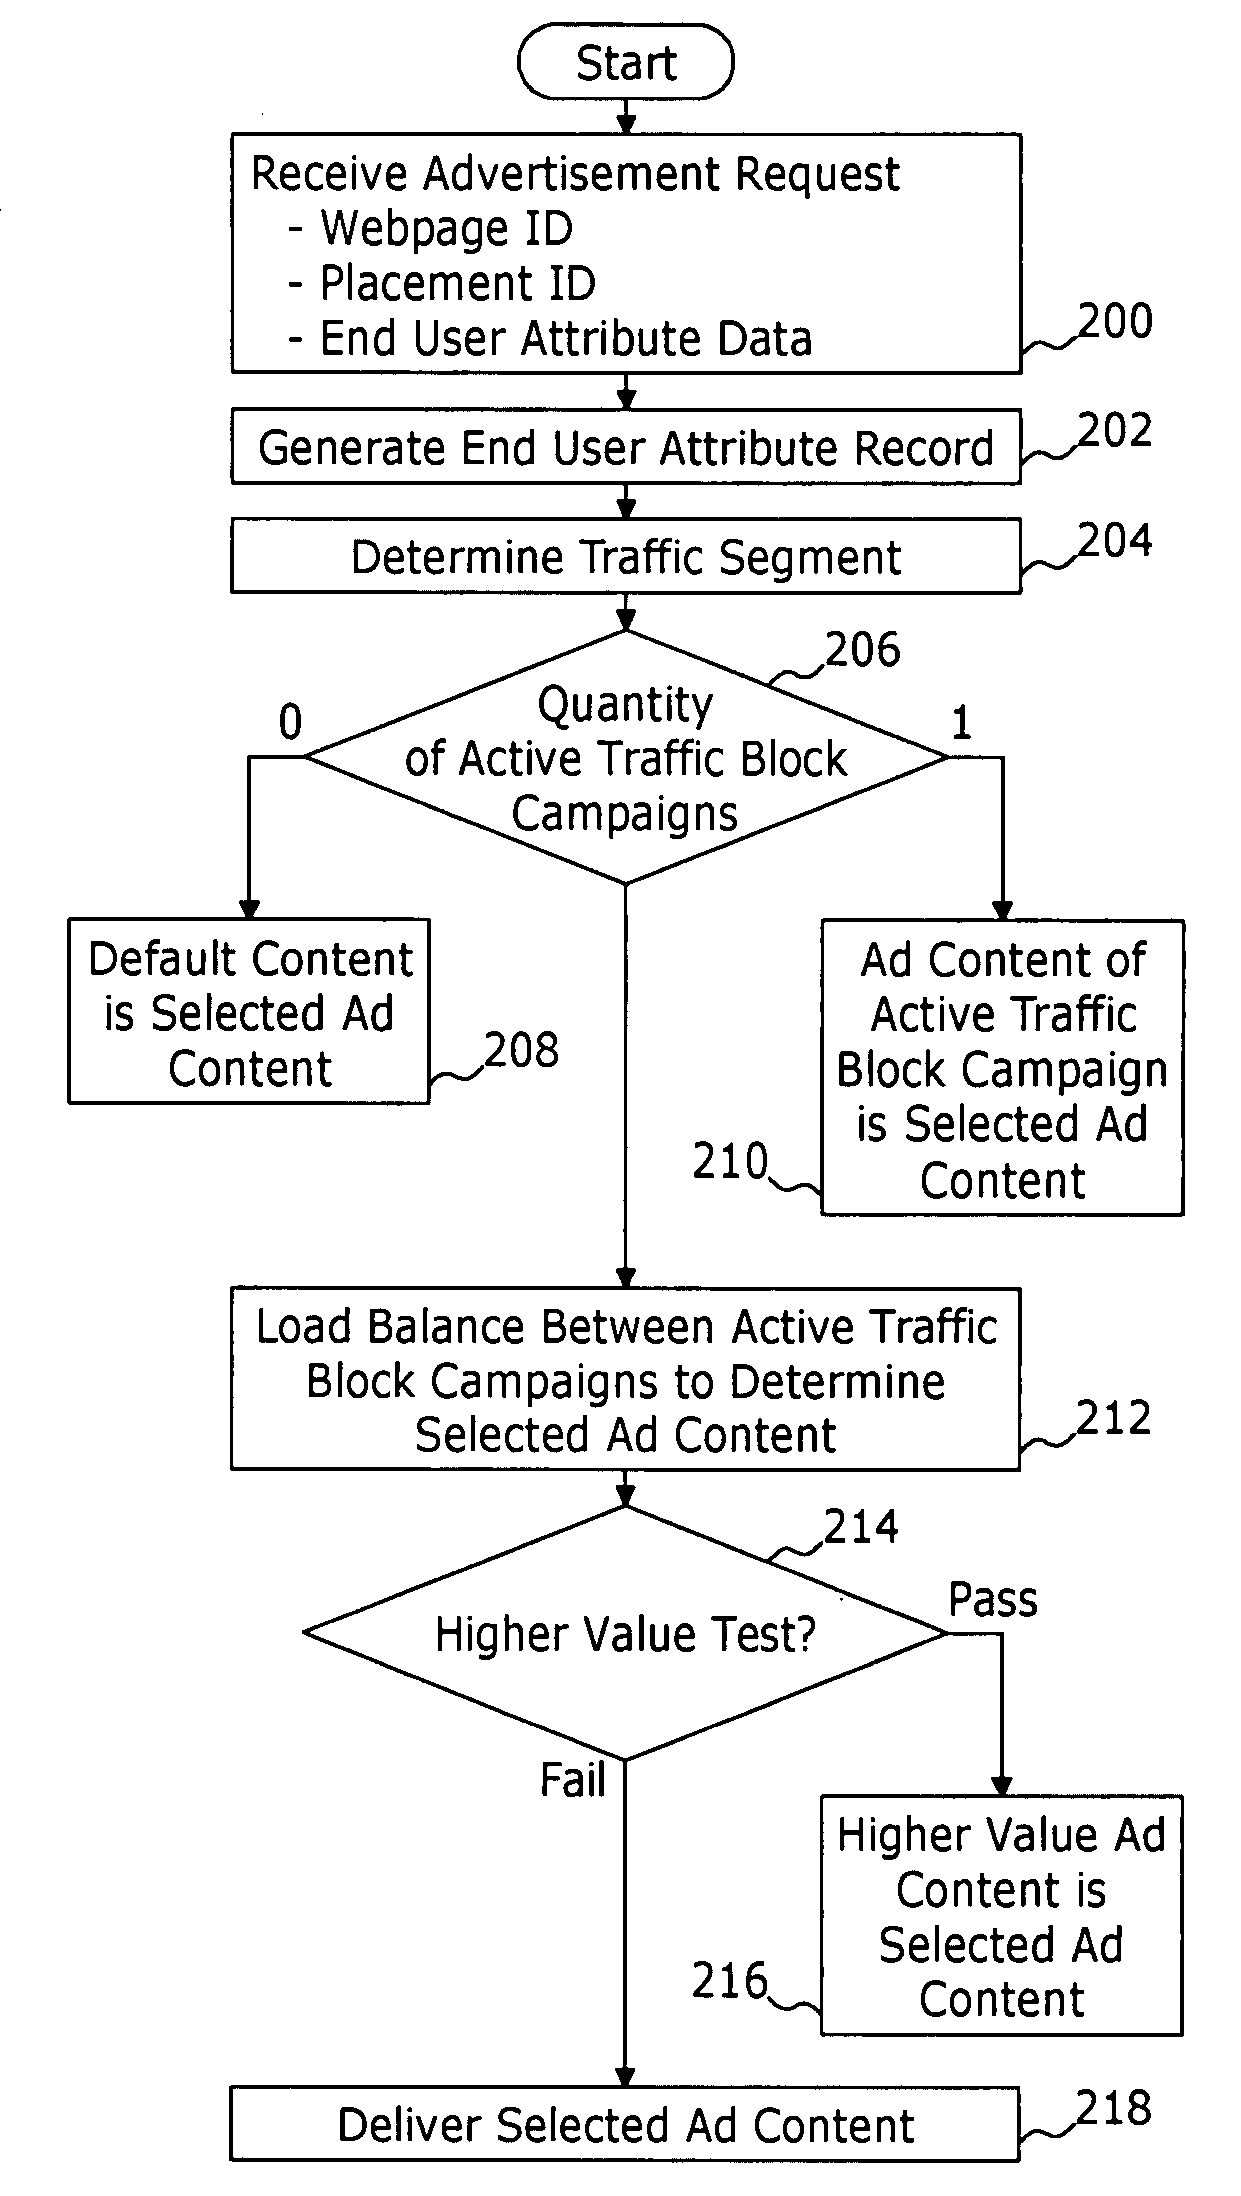 System and method for brokering the sale of internet advertisement inventory as discrete traffic blocks of segmented internet traffic